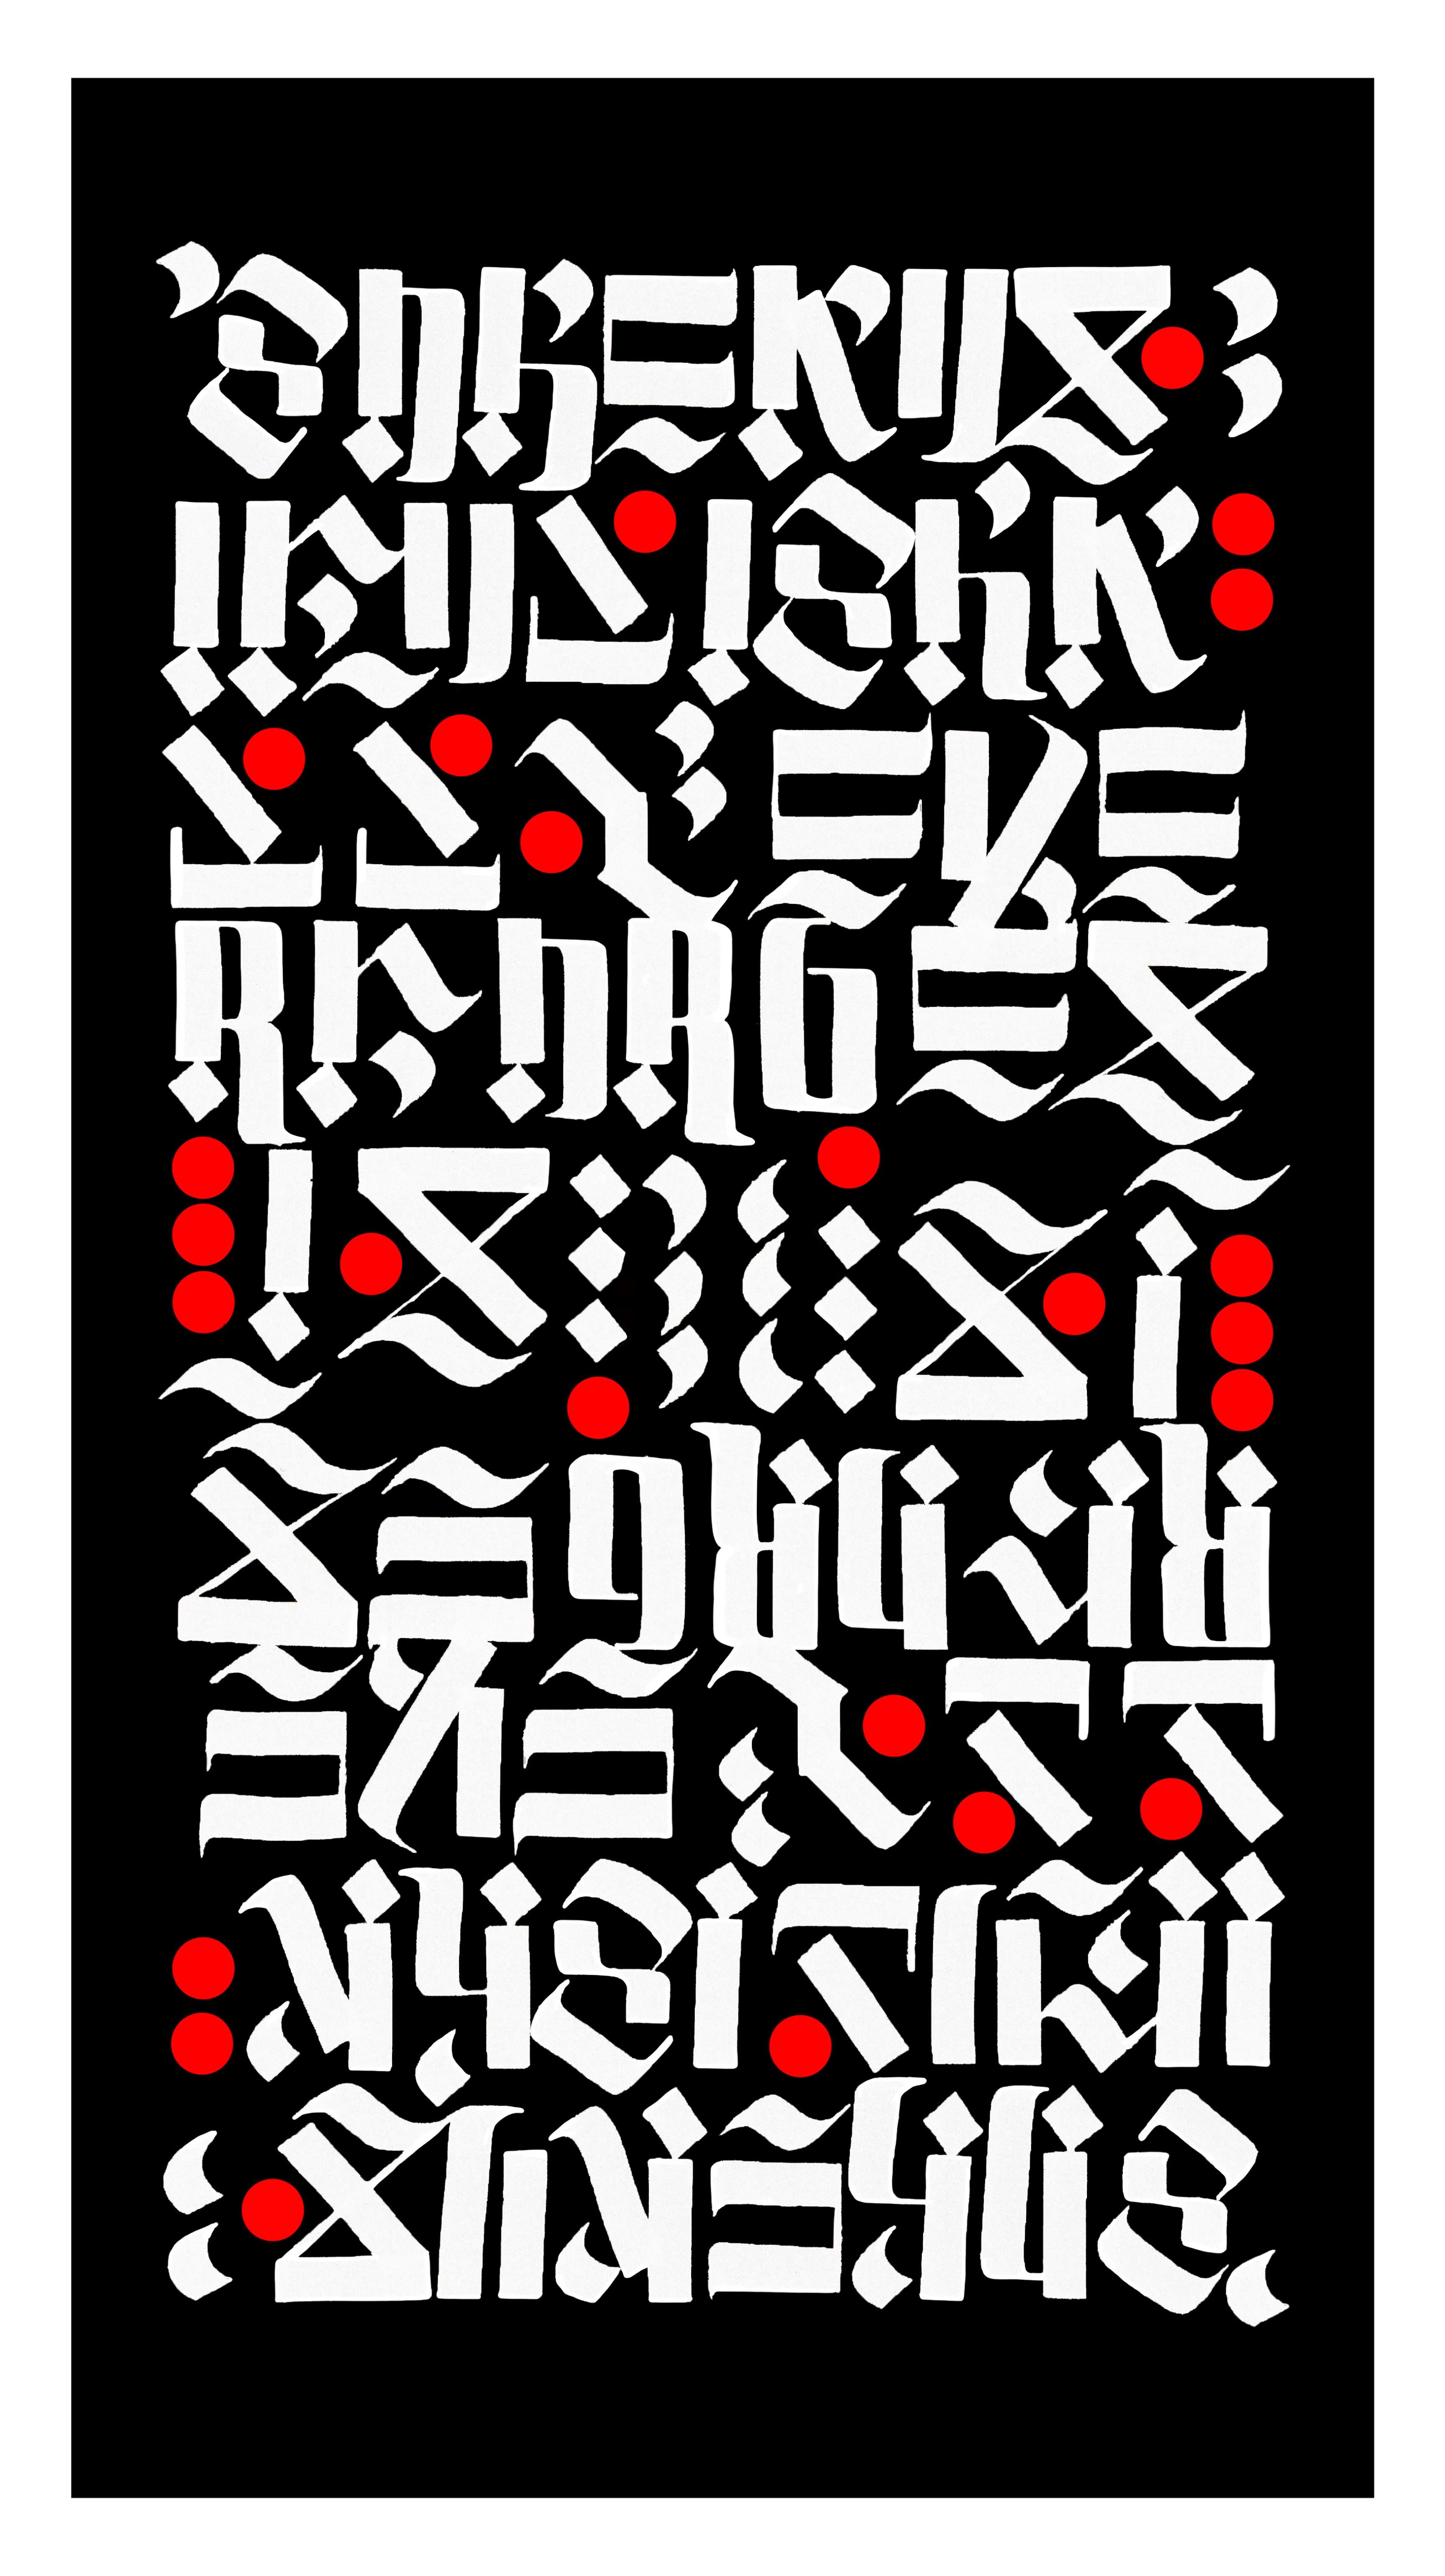 David Oquendo Print - So Beautiful I Shall Never Forget It - Black, Red and White Metaphrase Script 